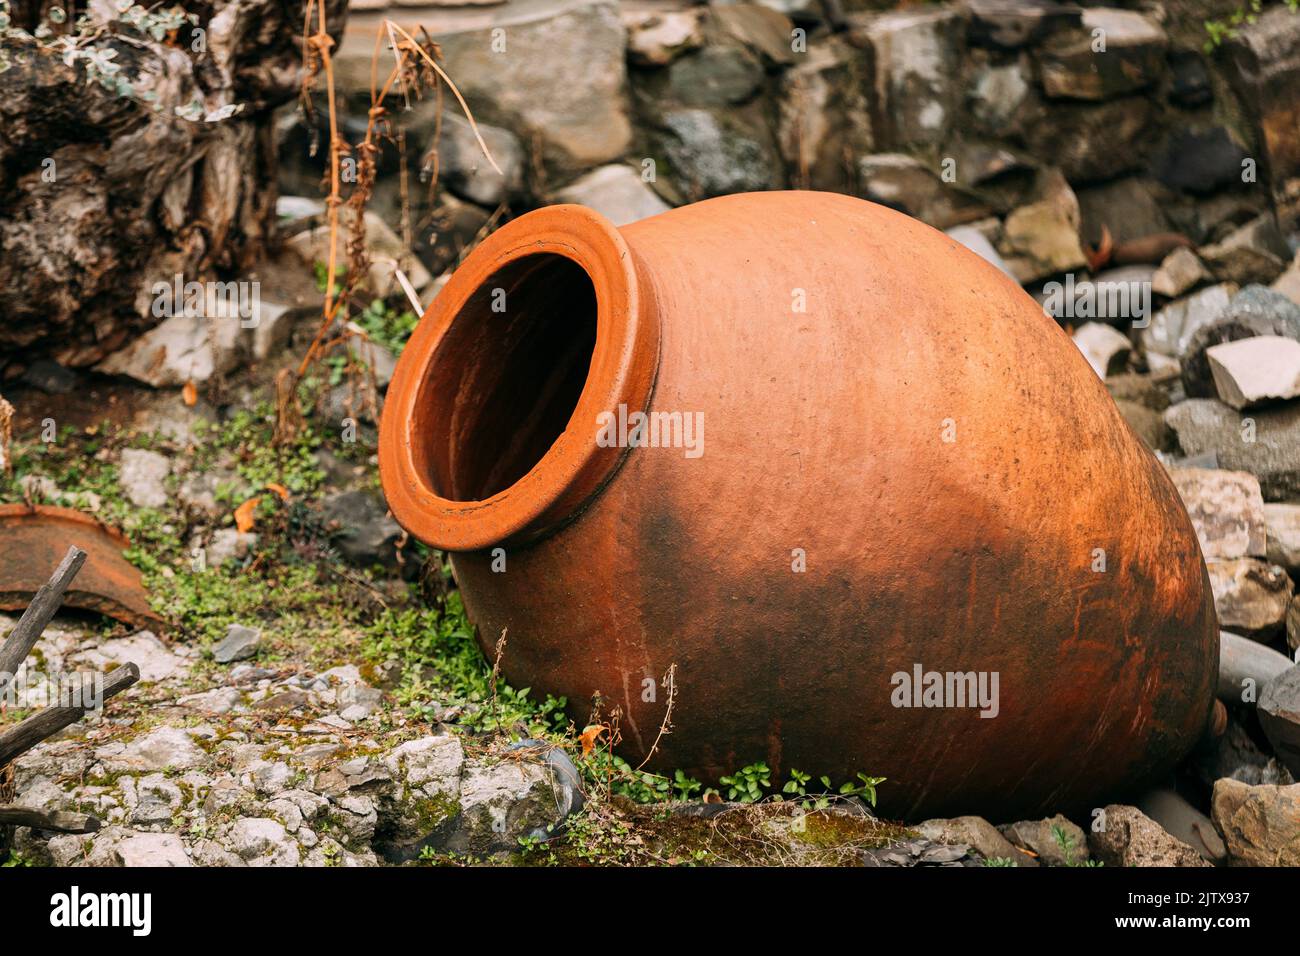 old Abandoned Kvevri on Ground. The Large Earthenware Vessel Used For The Fermentation, Storage And Ageing Of Traditional Georgian Wine. Stock Photo